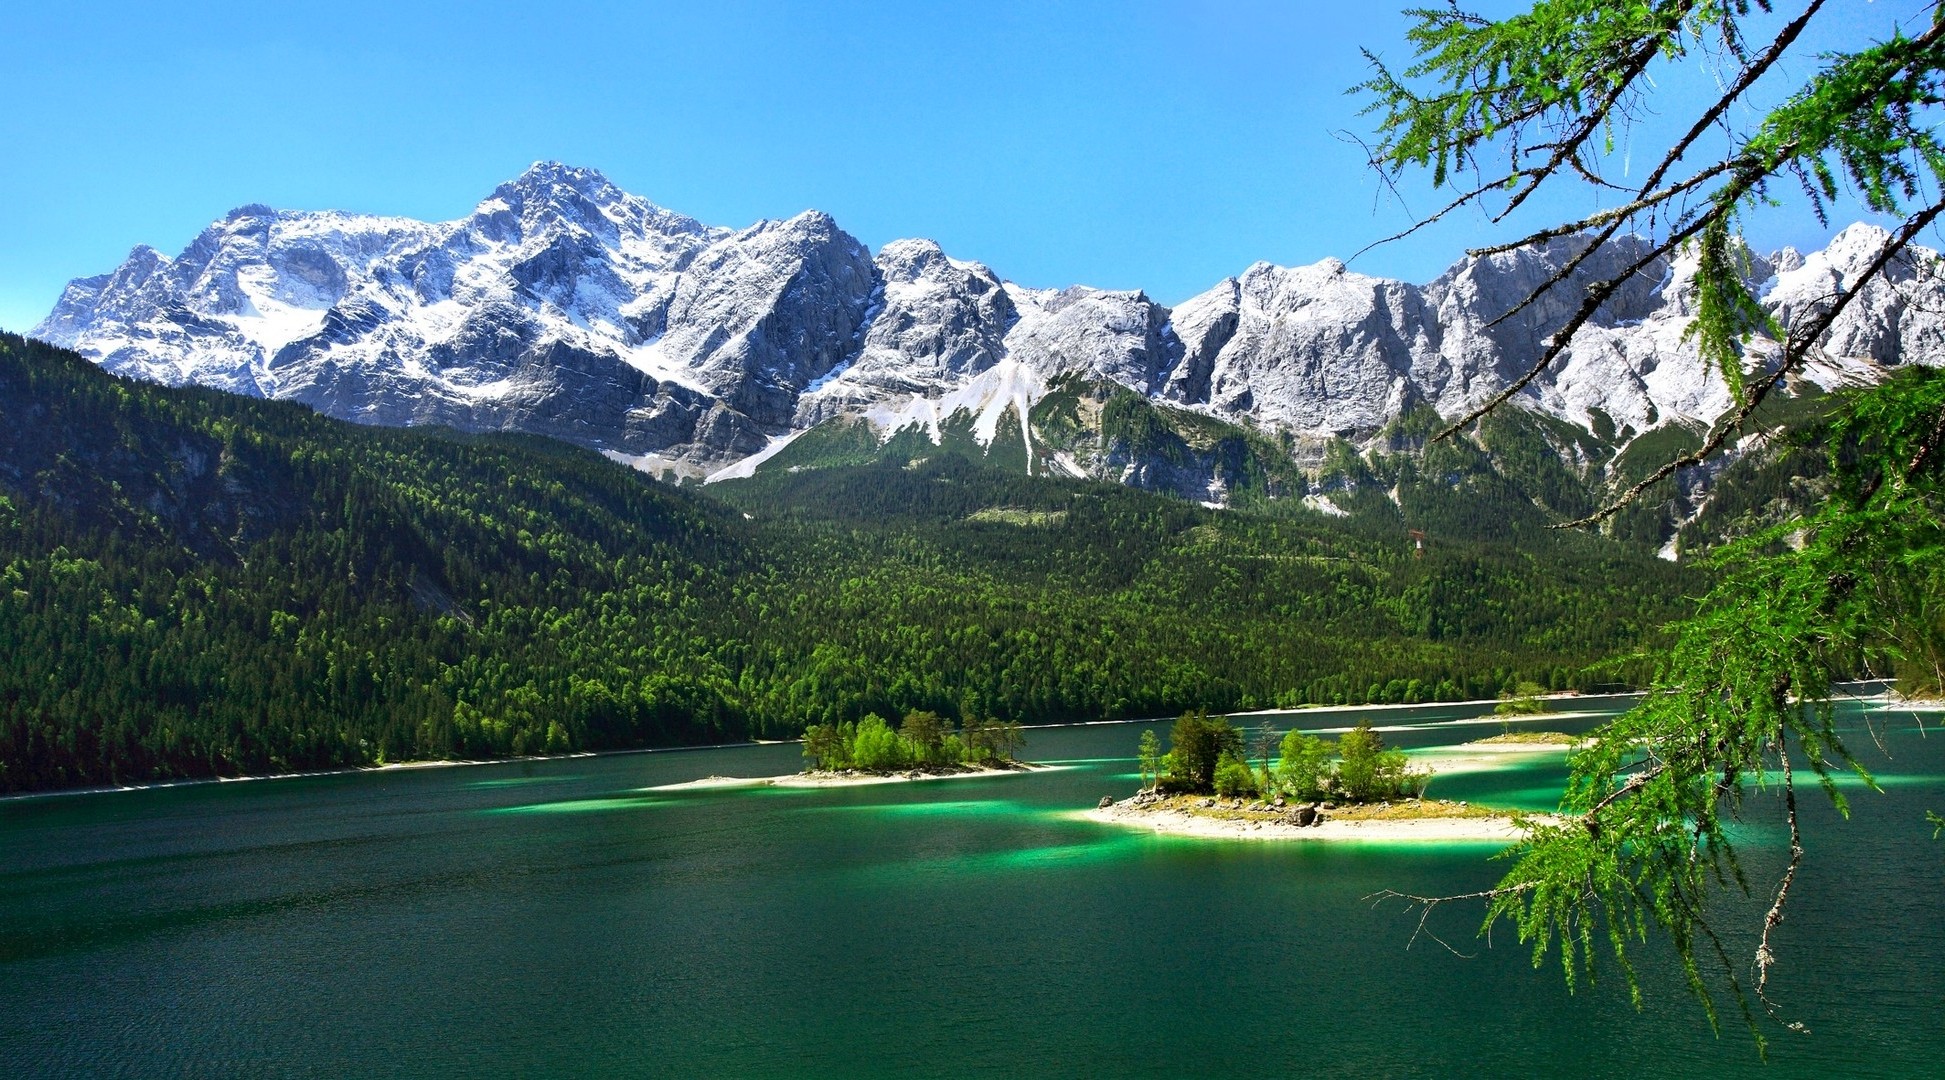 lake, Mountain, Forest, Nature, Landscape, Emerald, Water, Snowy Peak, Trees, Germany Wallpaper